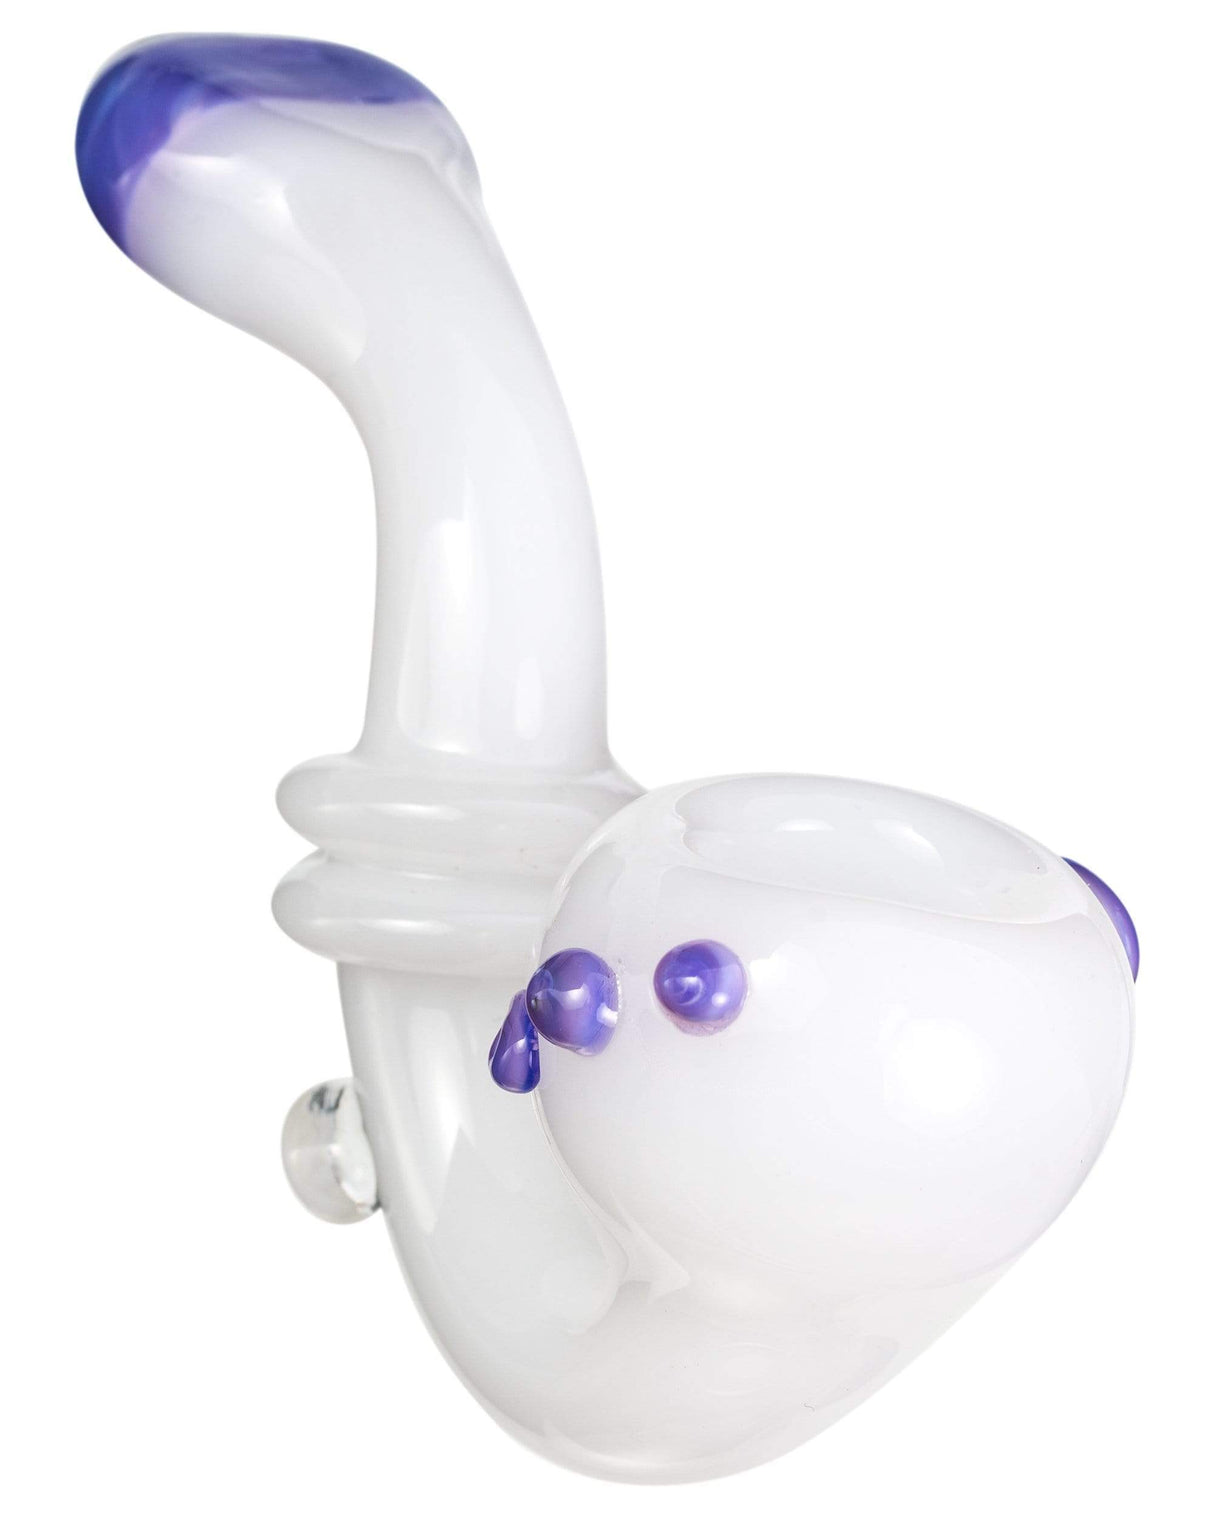 Maria Ring Sherlock Hand Pipe in Purple & White - Compact Glass Spoon Pipe for Dry Herbs